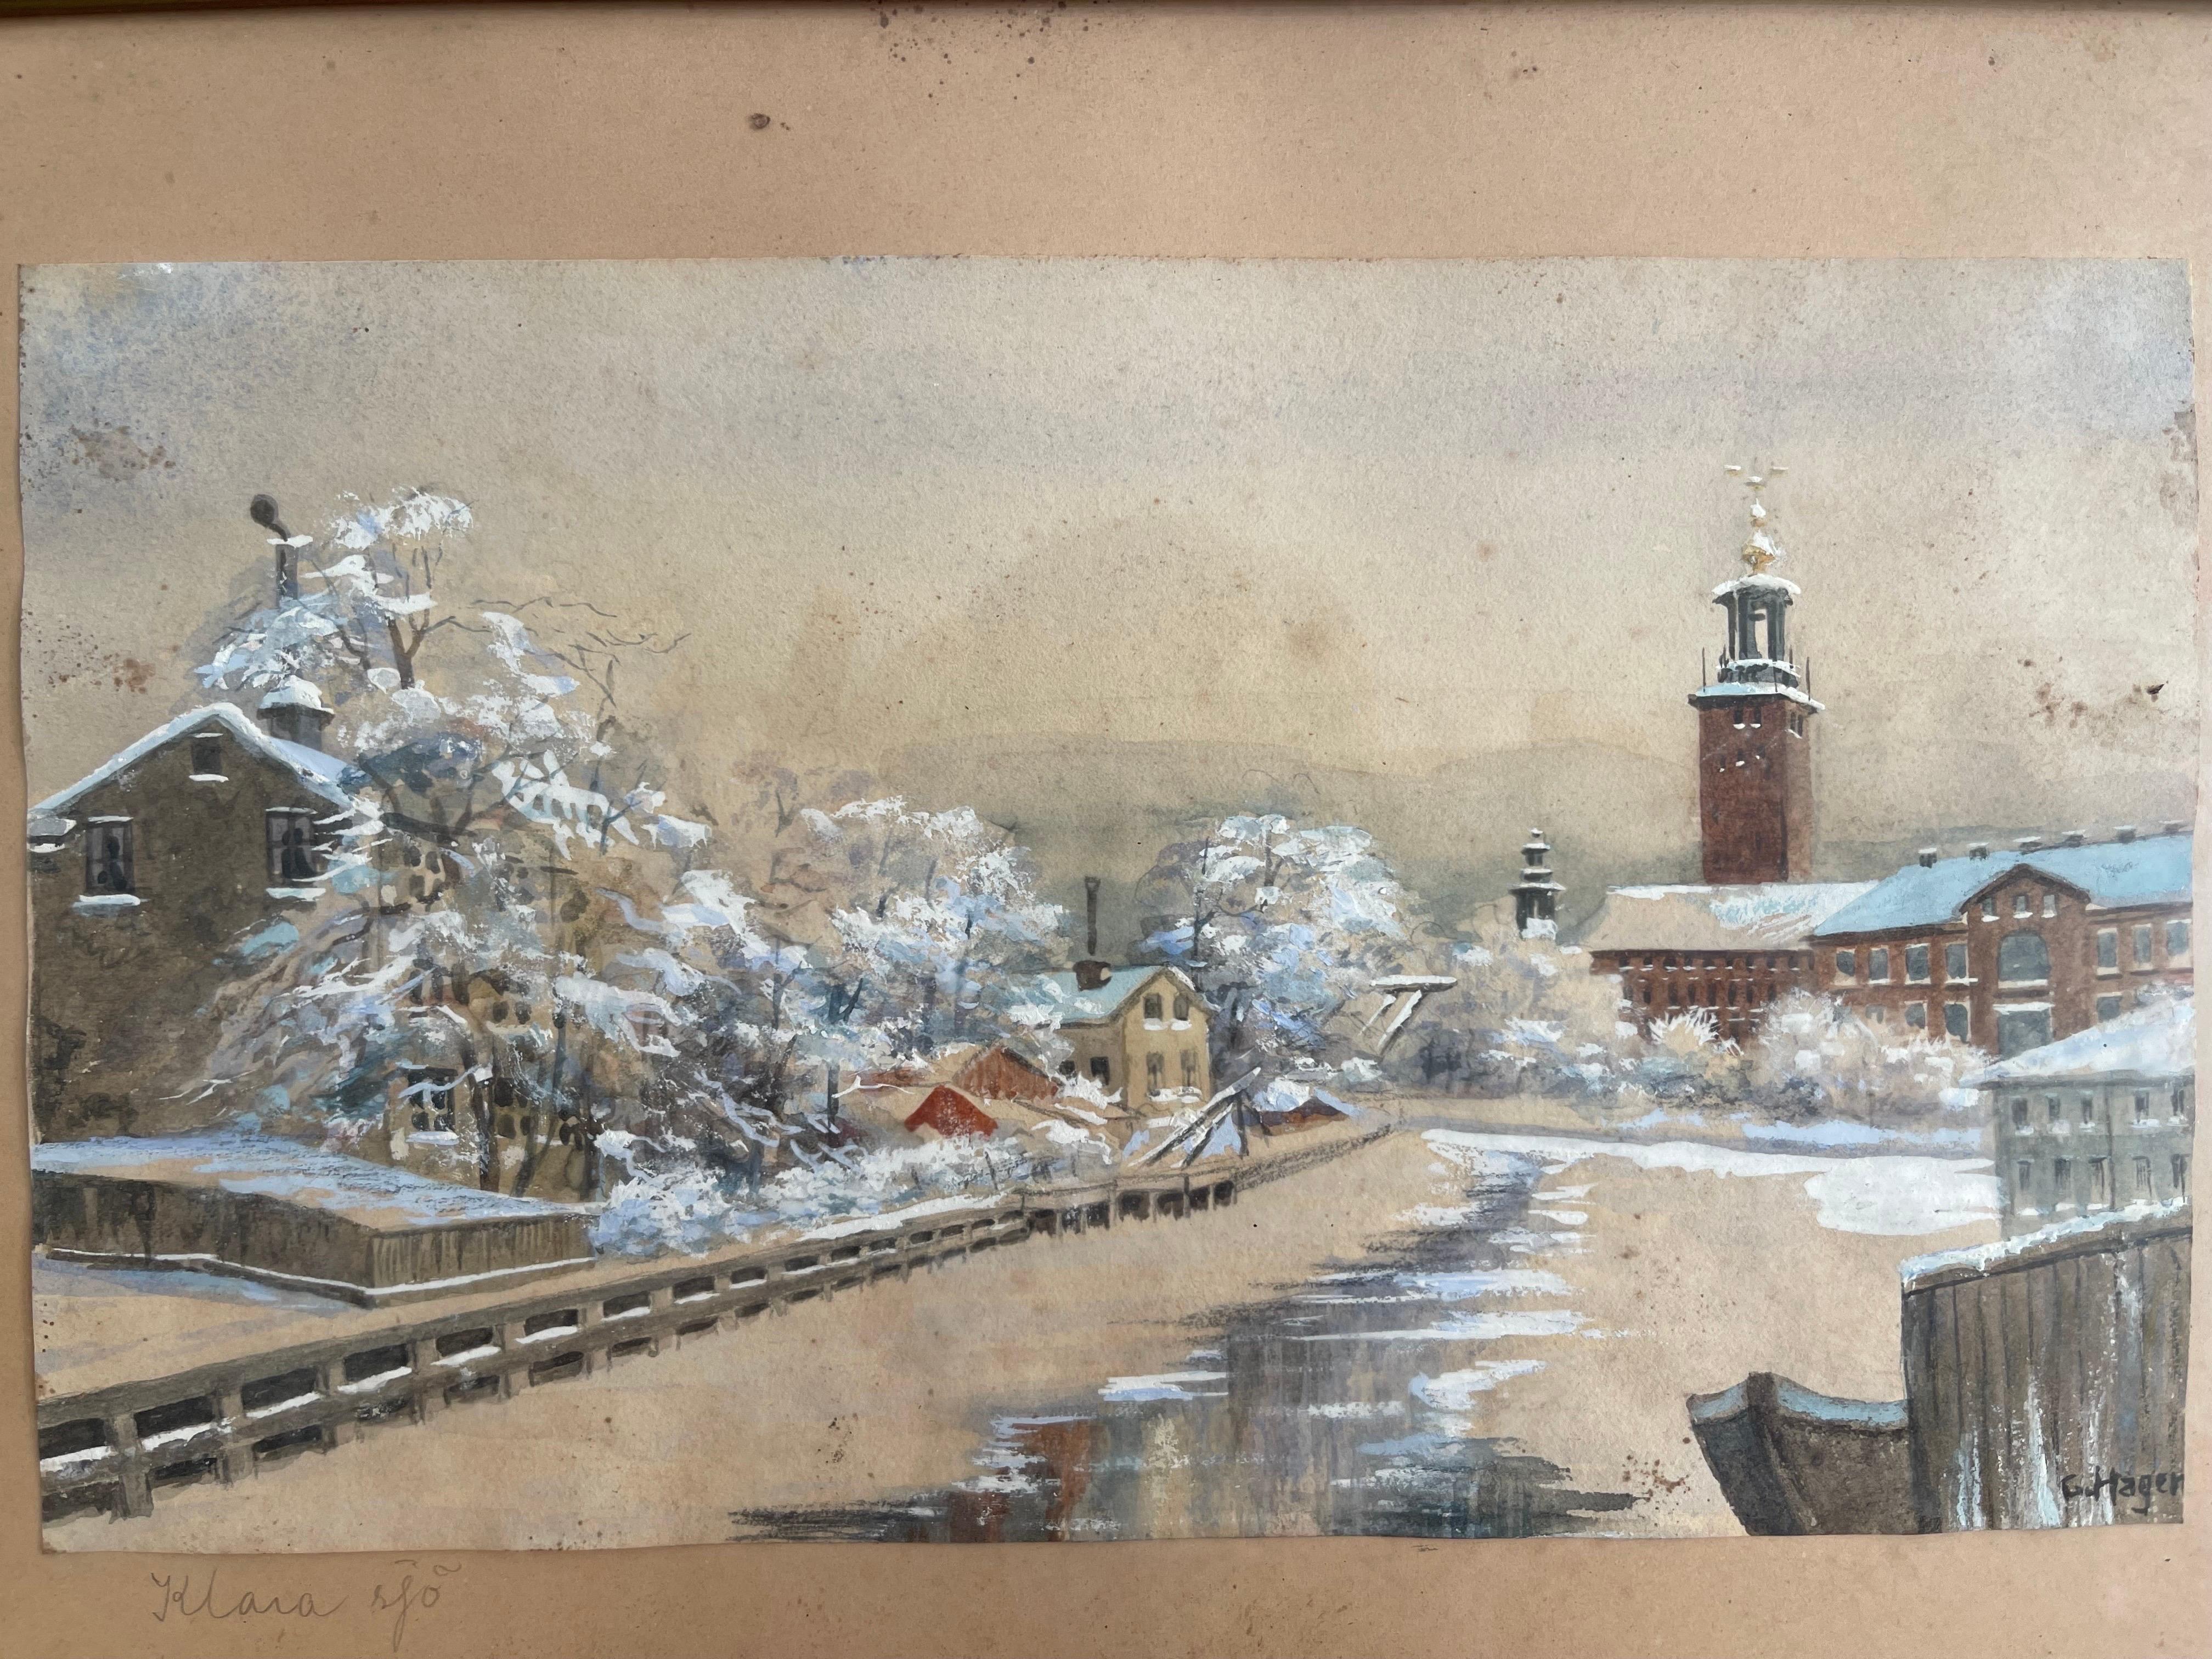 This swedish watercolour of Klara sjö is a canal in central Stockholm believed to be 1920/30s watercolour on paper a work of art by G or C Hagen unknow artist offers a beautiful winter river bank scene, with brown and snowy tones creating a